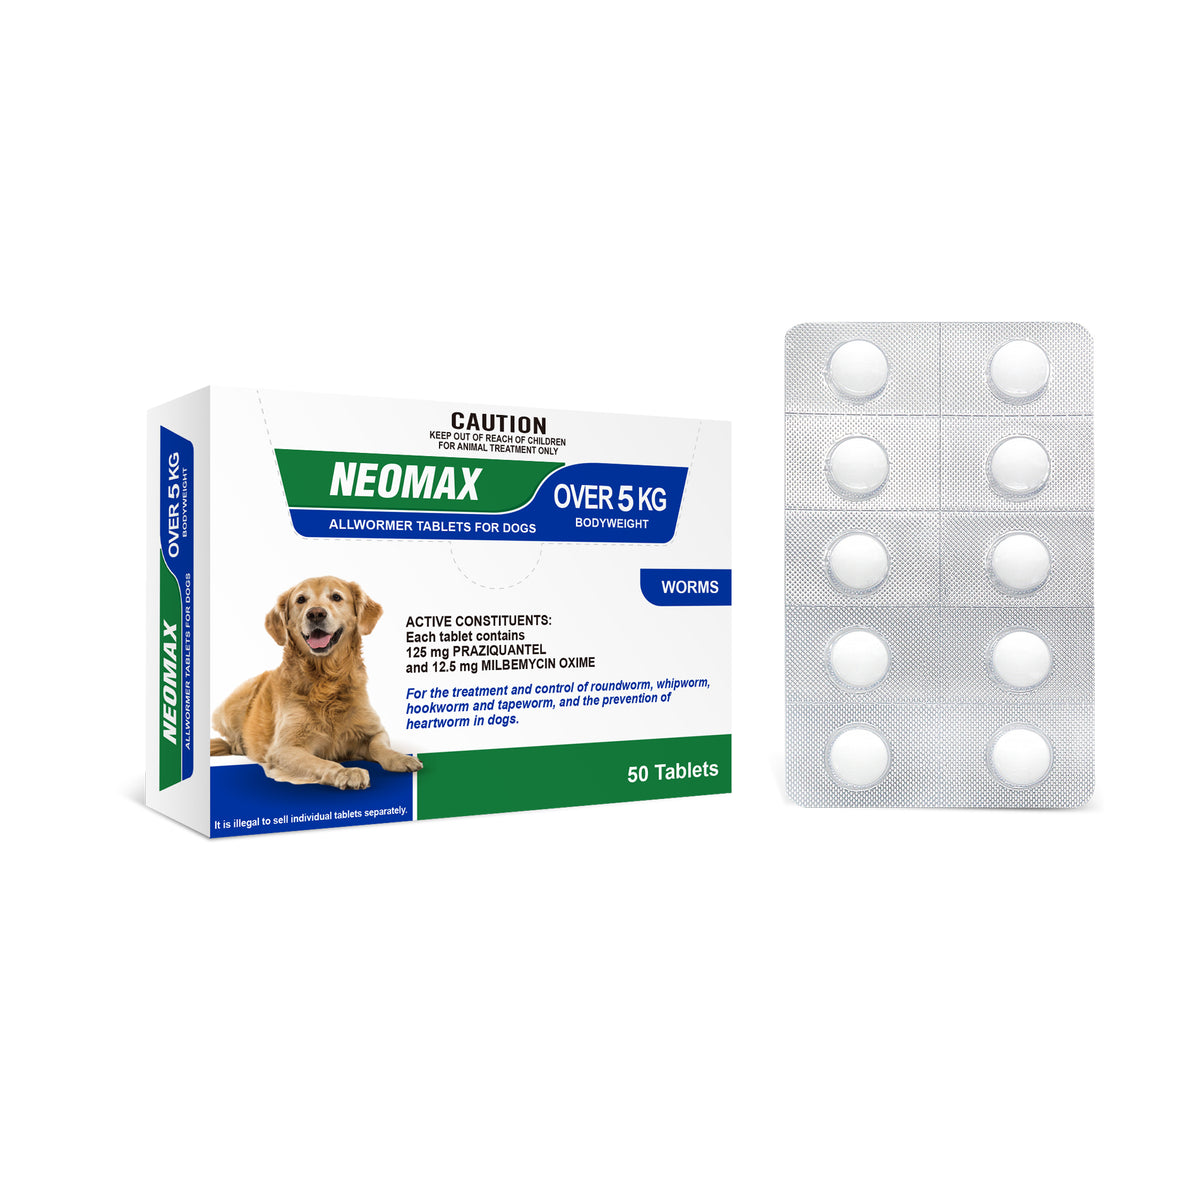 Neomax Allwormer Tablets for Dogs over 5kg